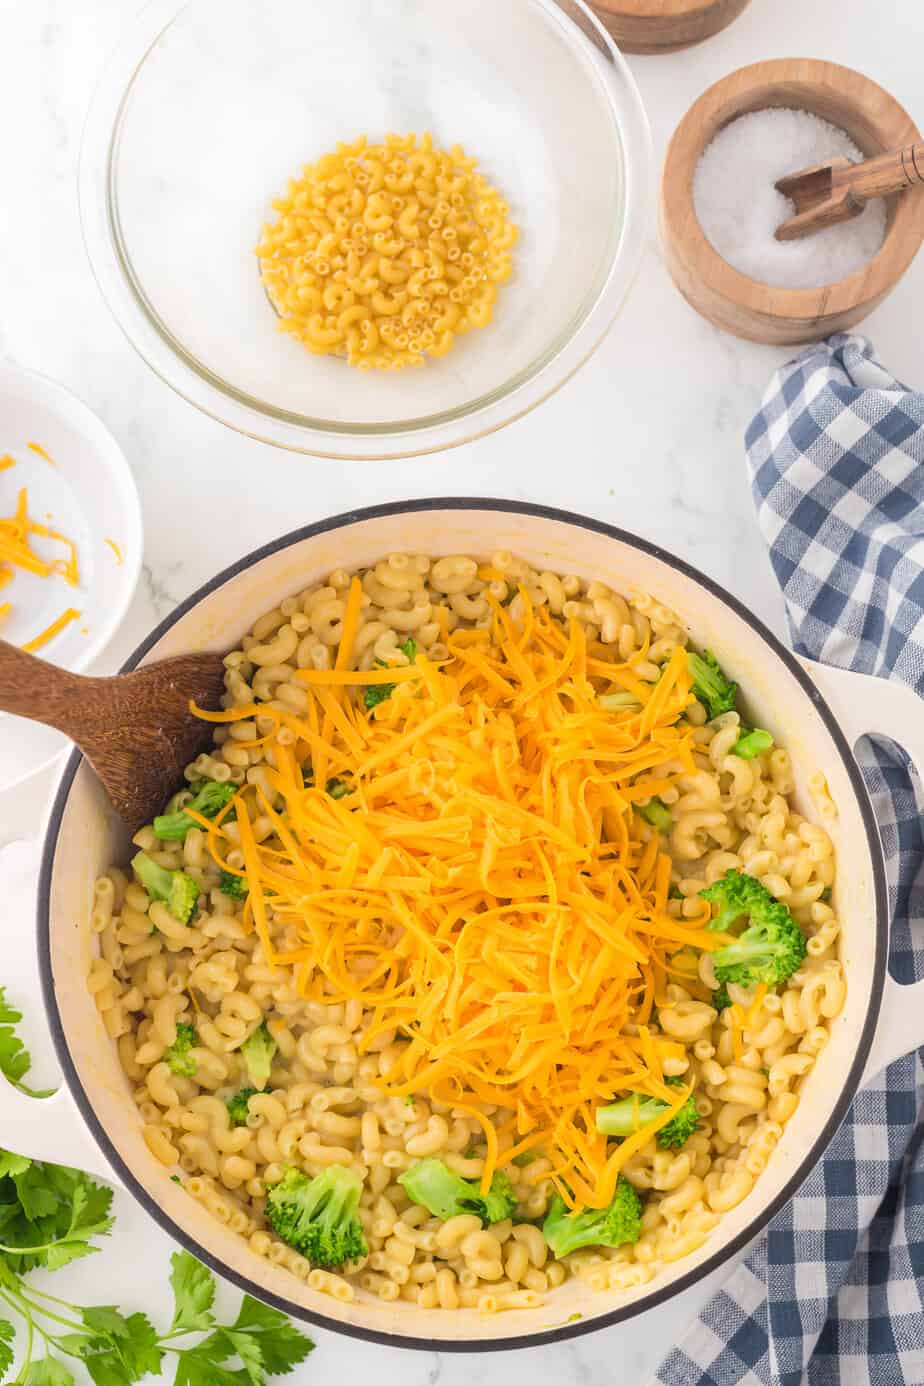 Shredded cheddar cheese being stirred into a pot of cooked macaroni and broccoli in a pot from overhead with more ingredients in bowls on the counter nearby.